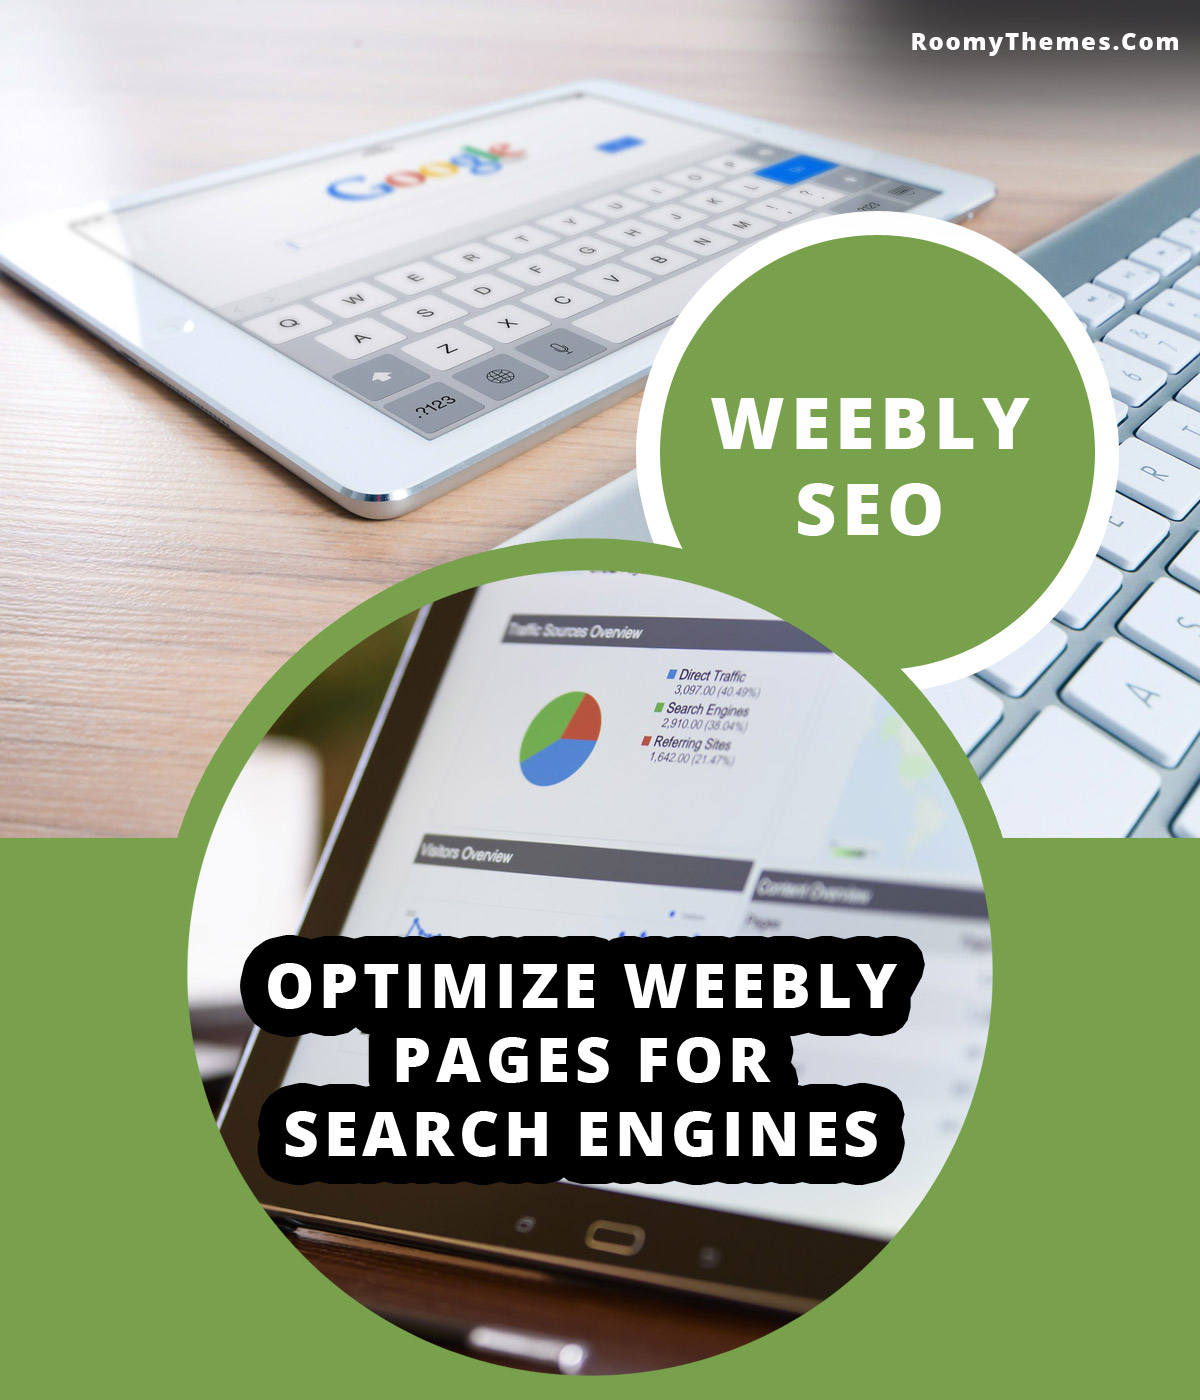 weebly seo - optimize weebly pages for search engines